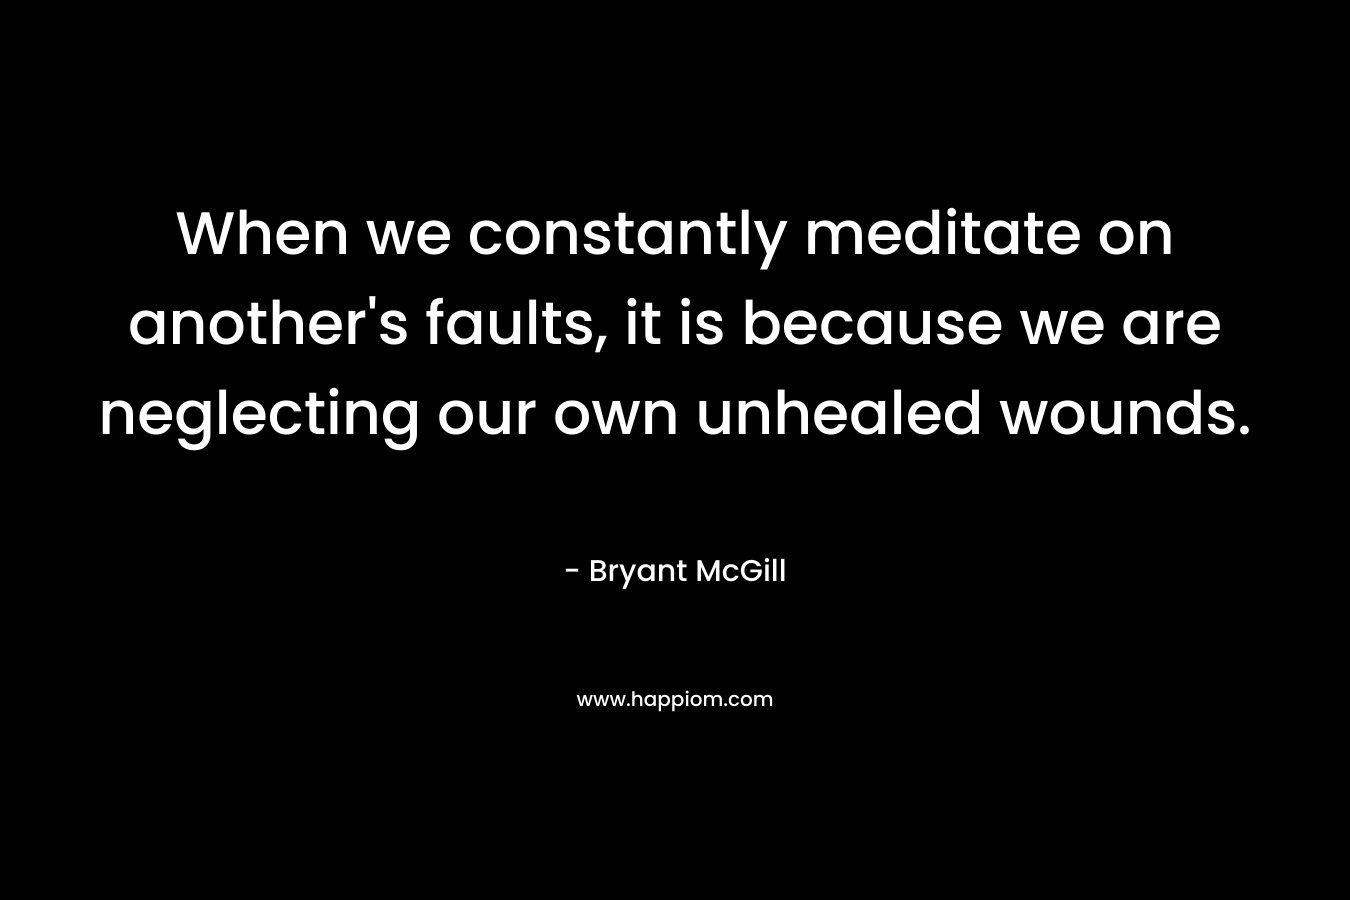 When we constantly meditate on another's faults, it is because we are neglecting our own unhealed wounds.